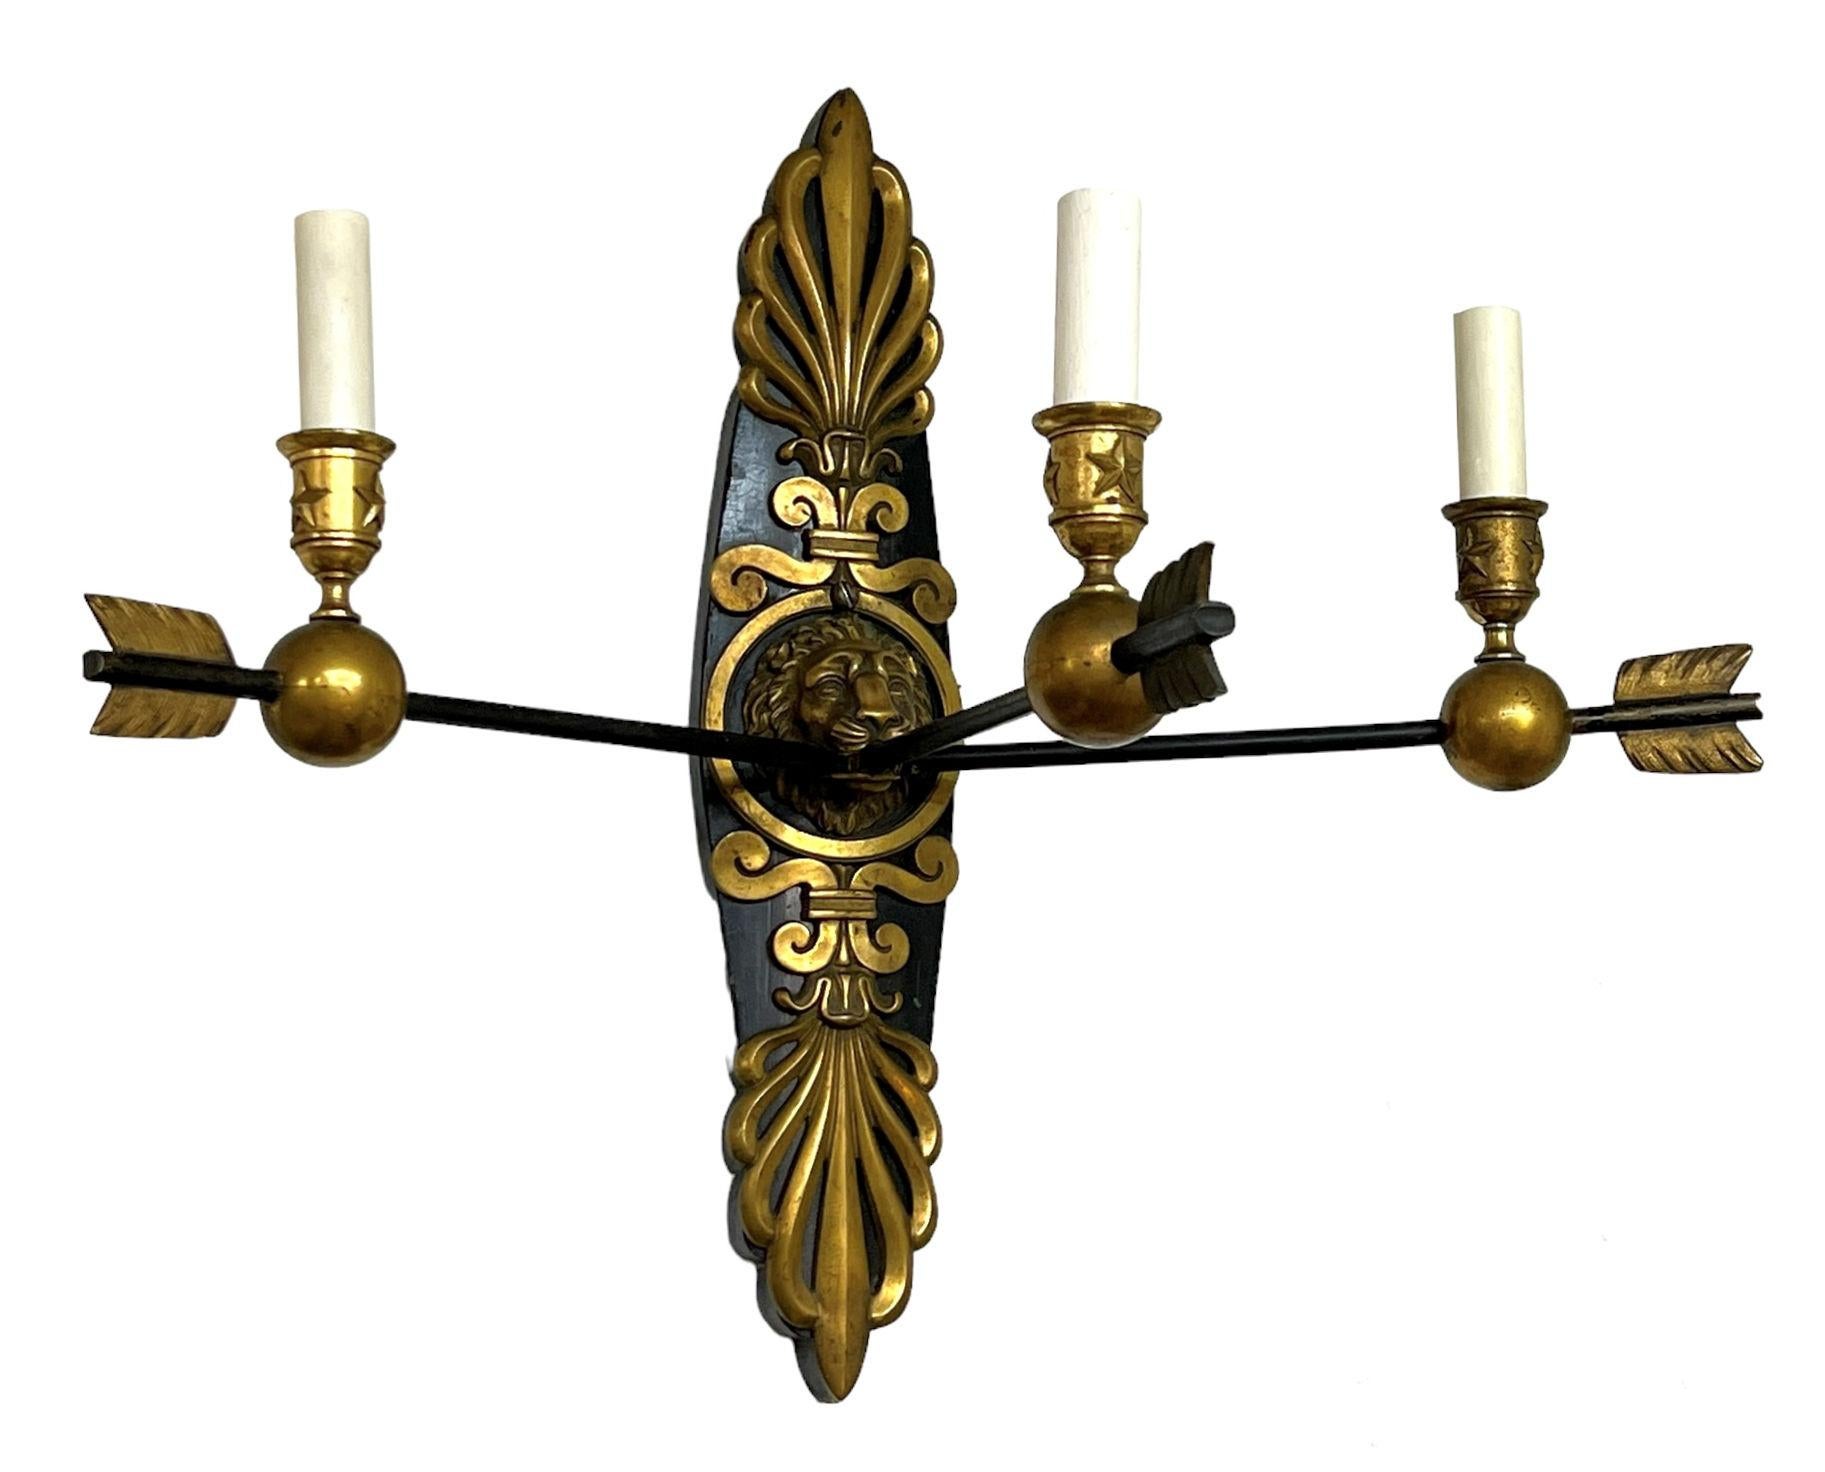 Our French Empire style sconces have three arrow-form candle arms ending with candleholders with star motifs, and emanate from lion mask back plates with palmette crests that are mounted on ebonized wooden back plates. Standard size sockets with